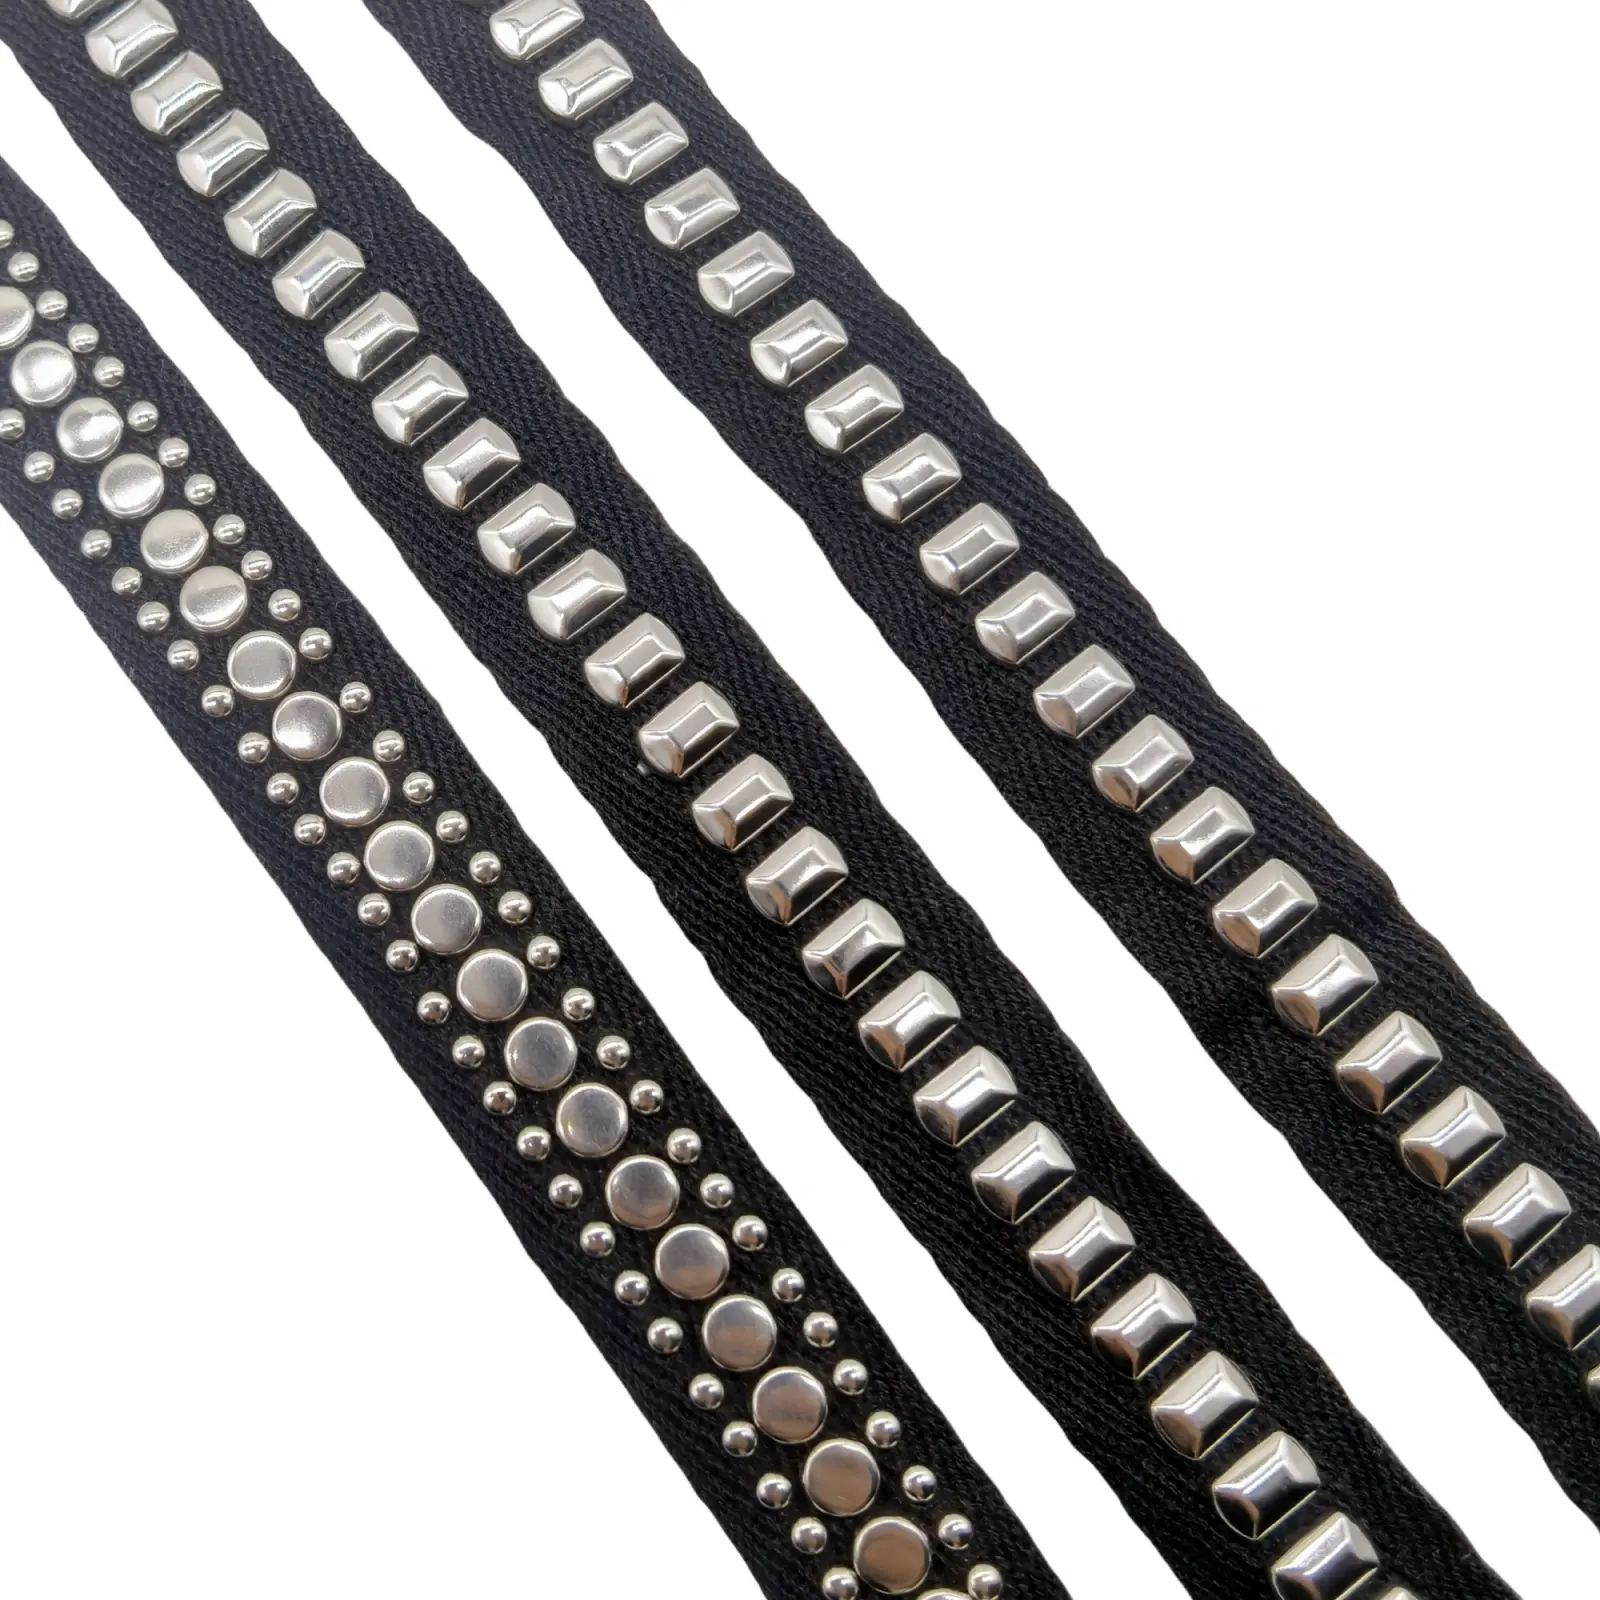 Newfangled Garment Clothing Accessories Cotton Webbing With Rivet Studded Black And White Cotton Tape